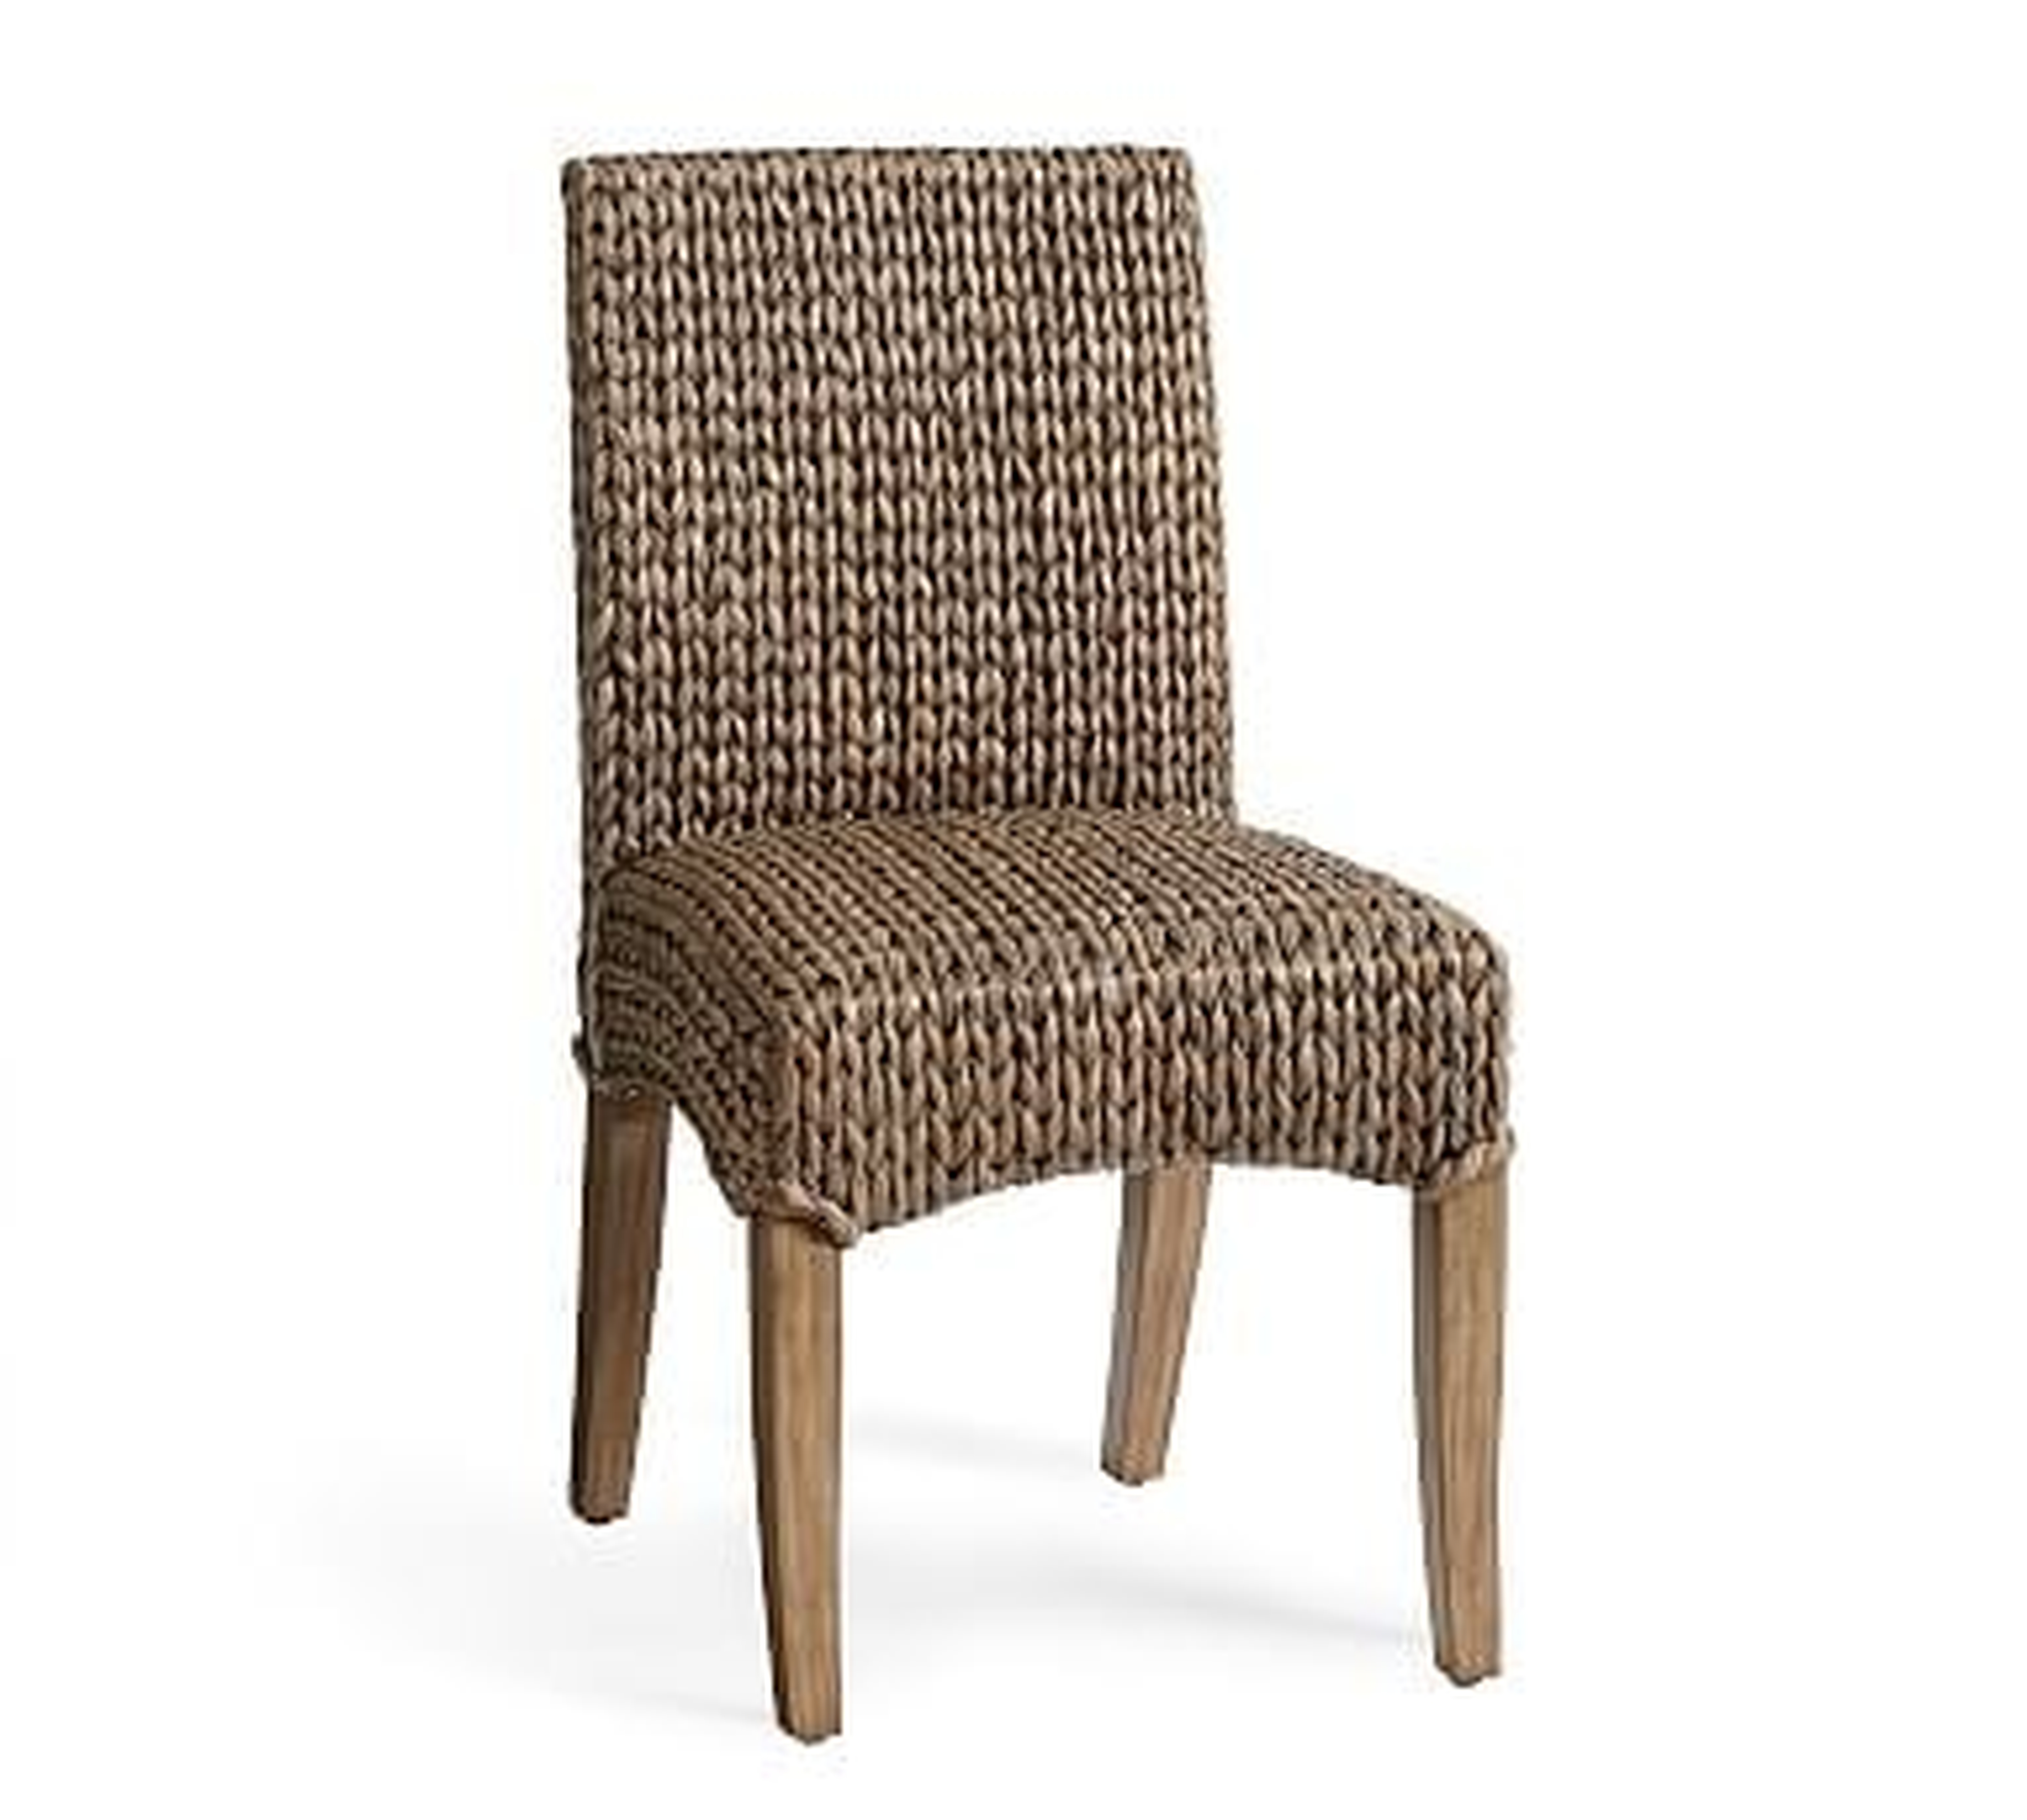 Seagrass Dining Side Chair, Gray Wash with Seadrift Leg - Pottery Barn